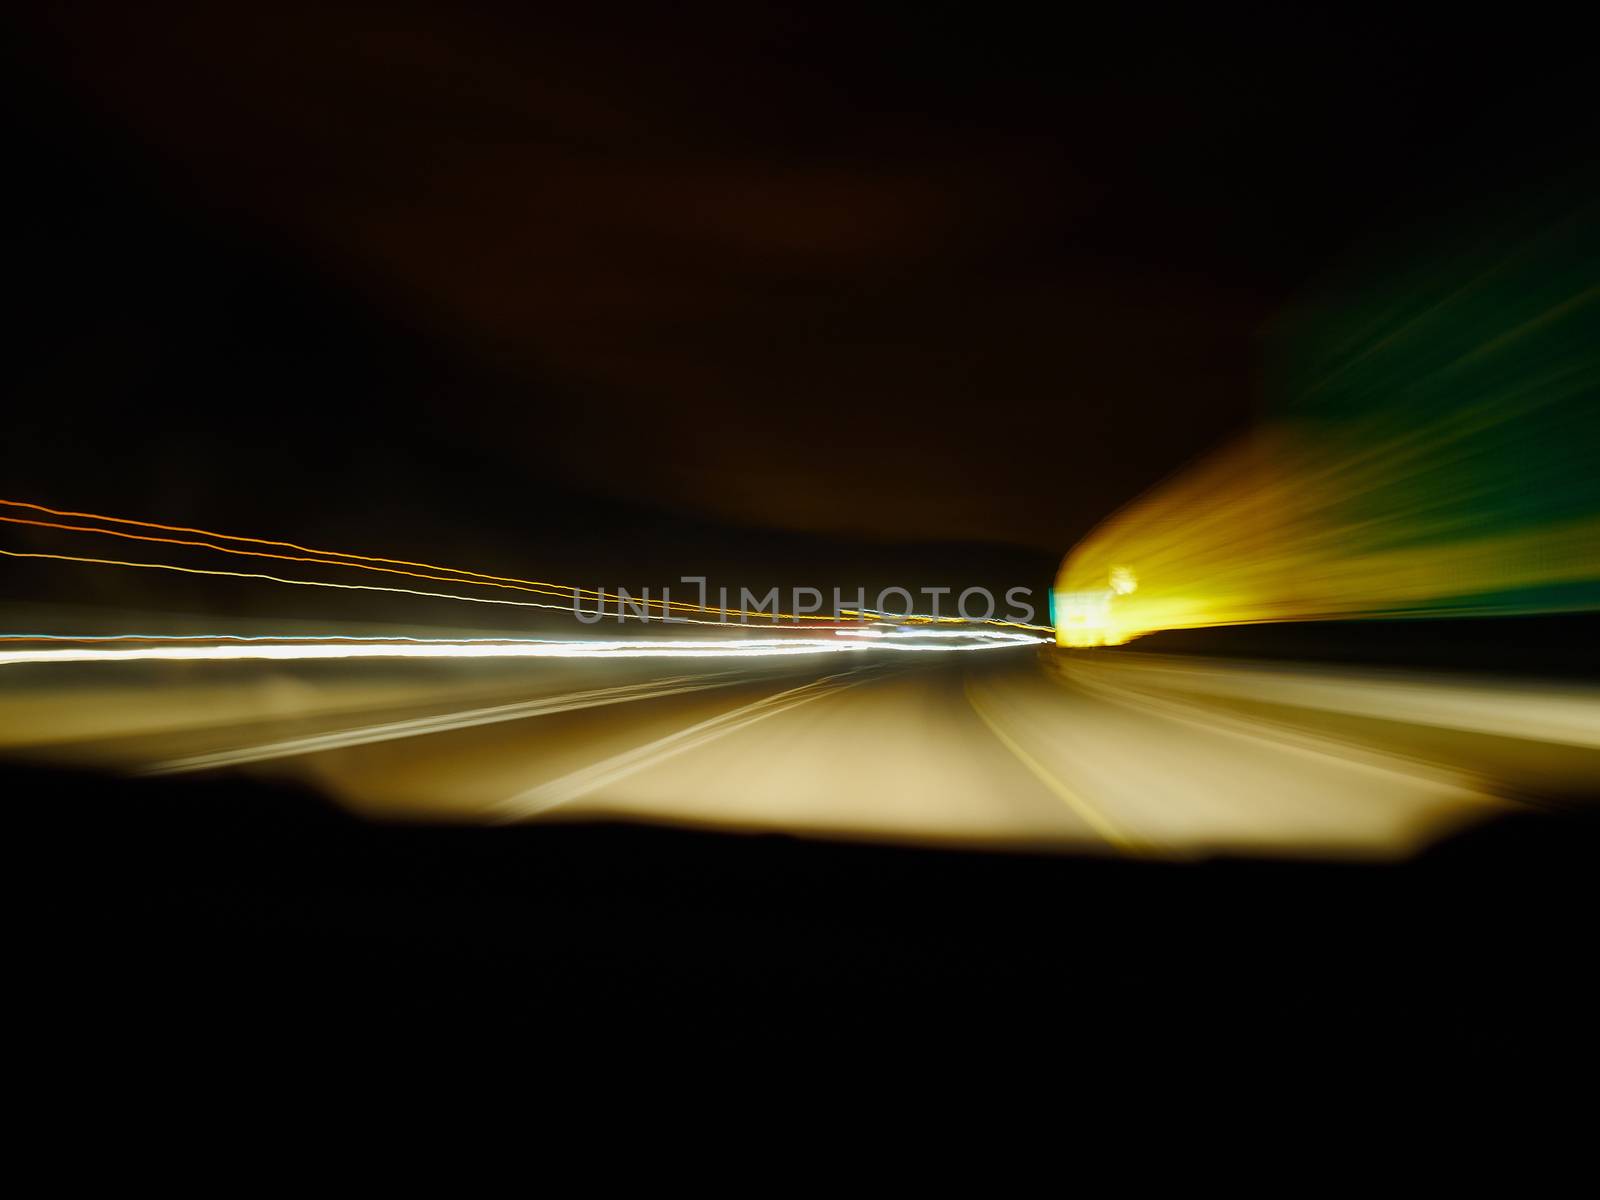 Driving at night scenery with colorful blurred lights background